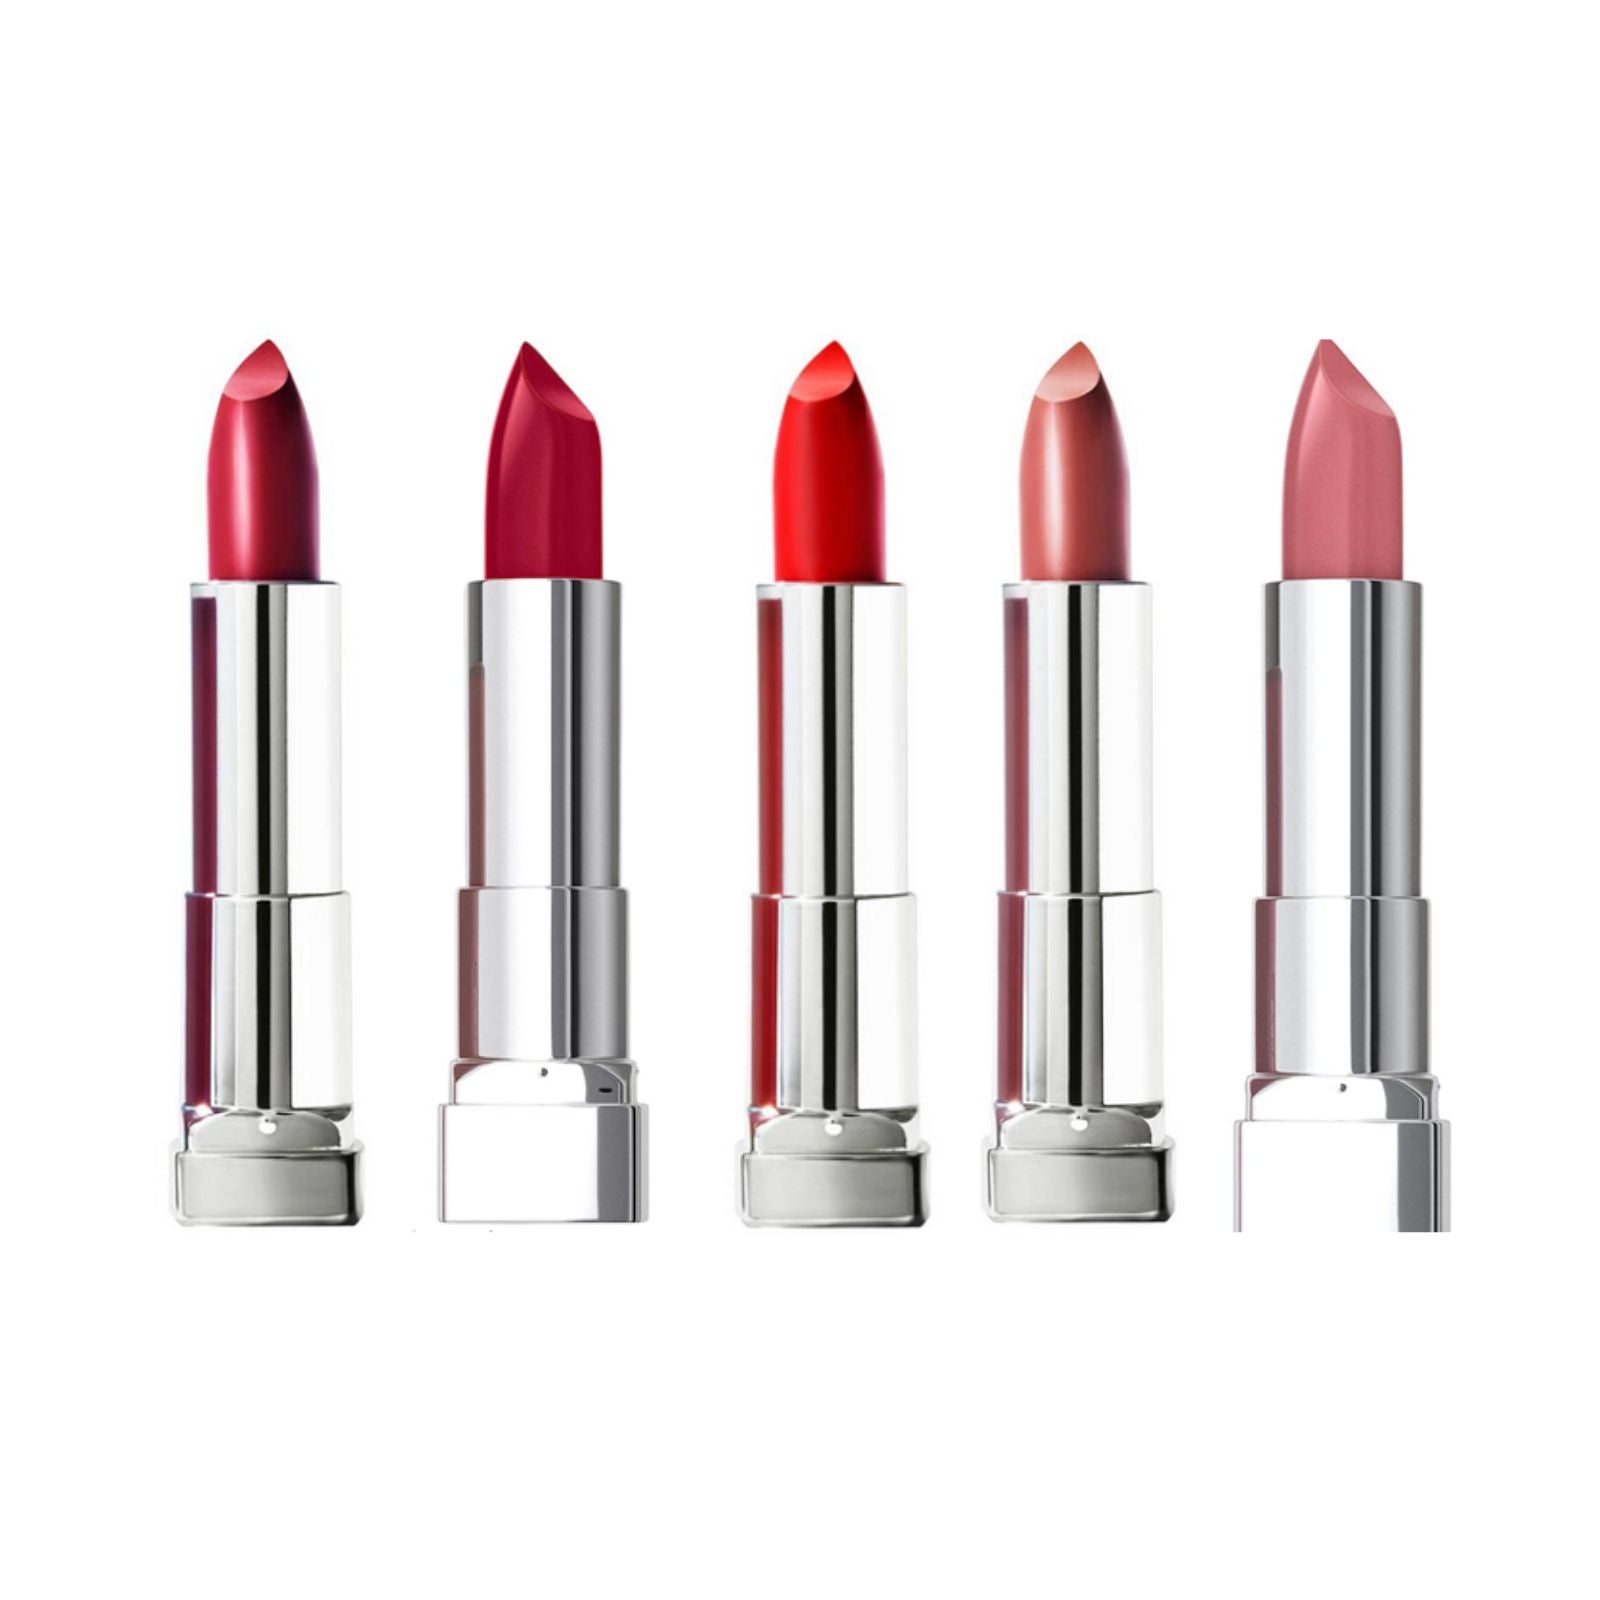 Maybelline Lipstick: Striking Color, Anytime Long-lasting – & Hydrating Makeup